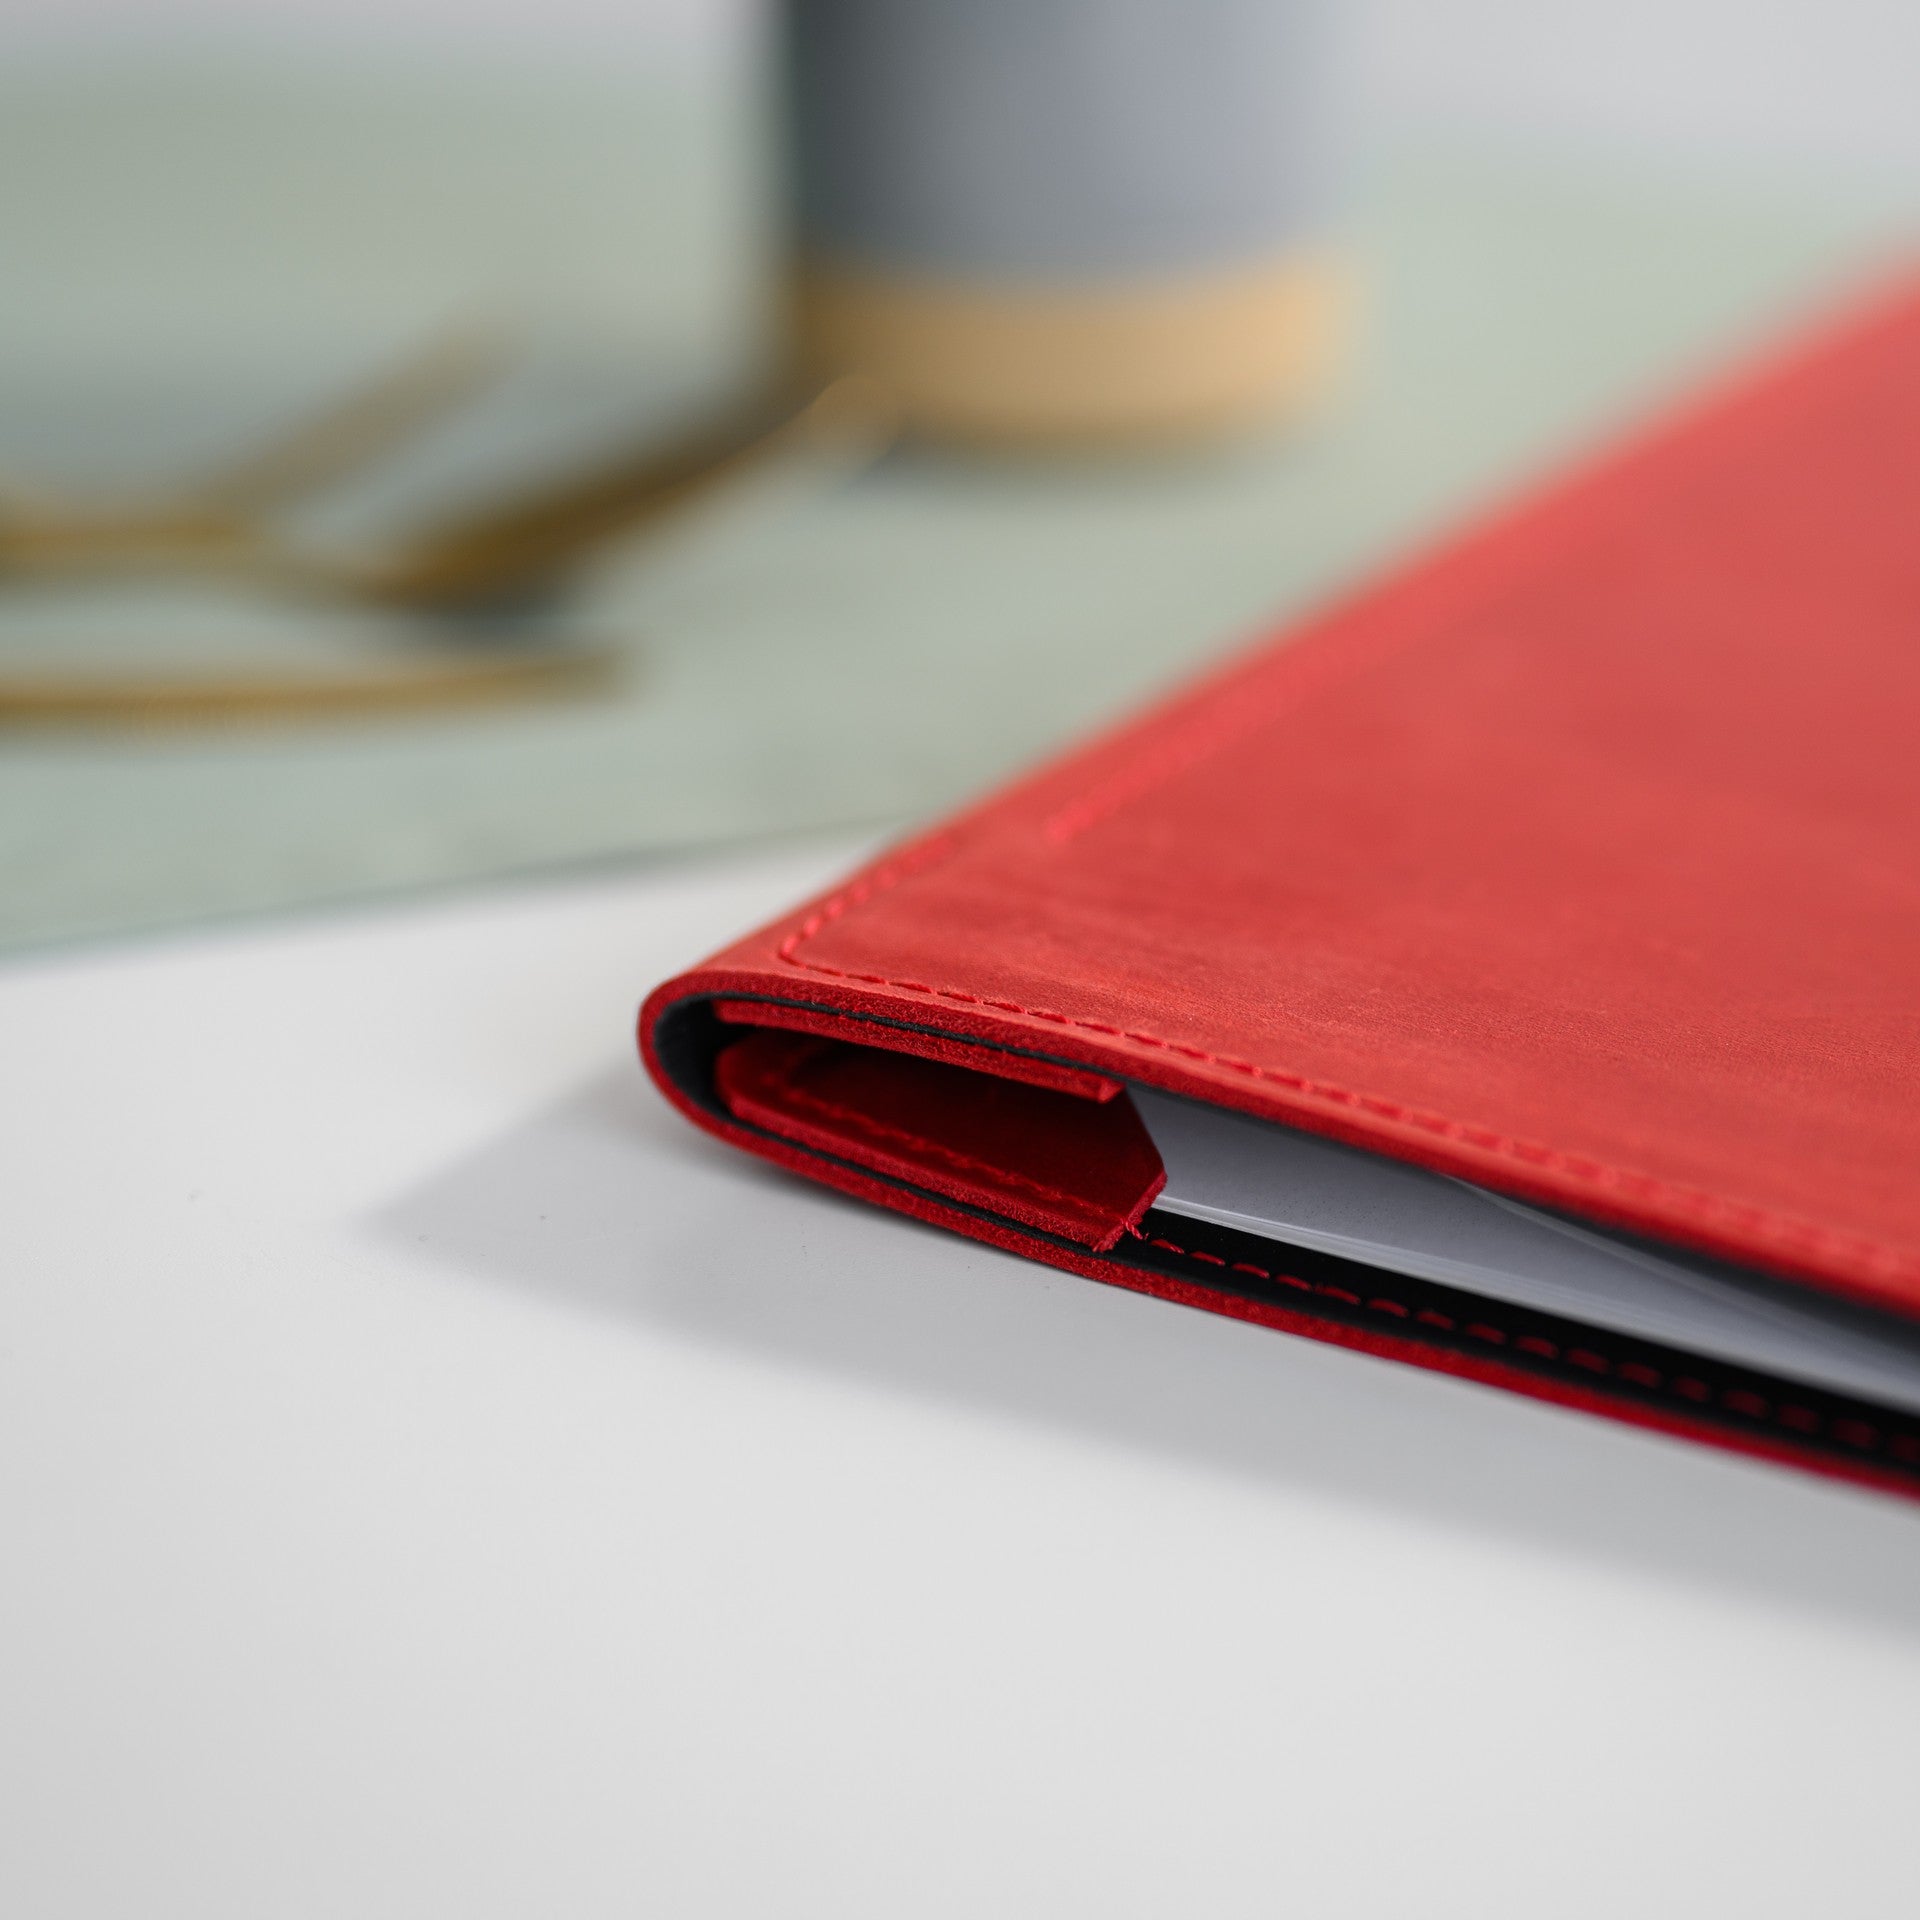 Sophisticated Leather Menu Clipboard, adding a touch of class to your menu presentation with its timeless design.